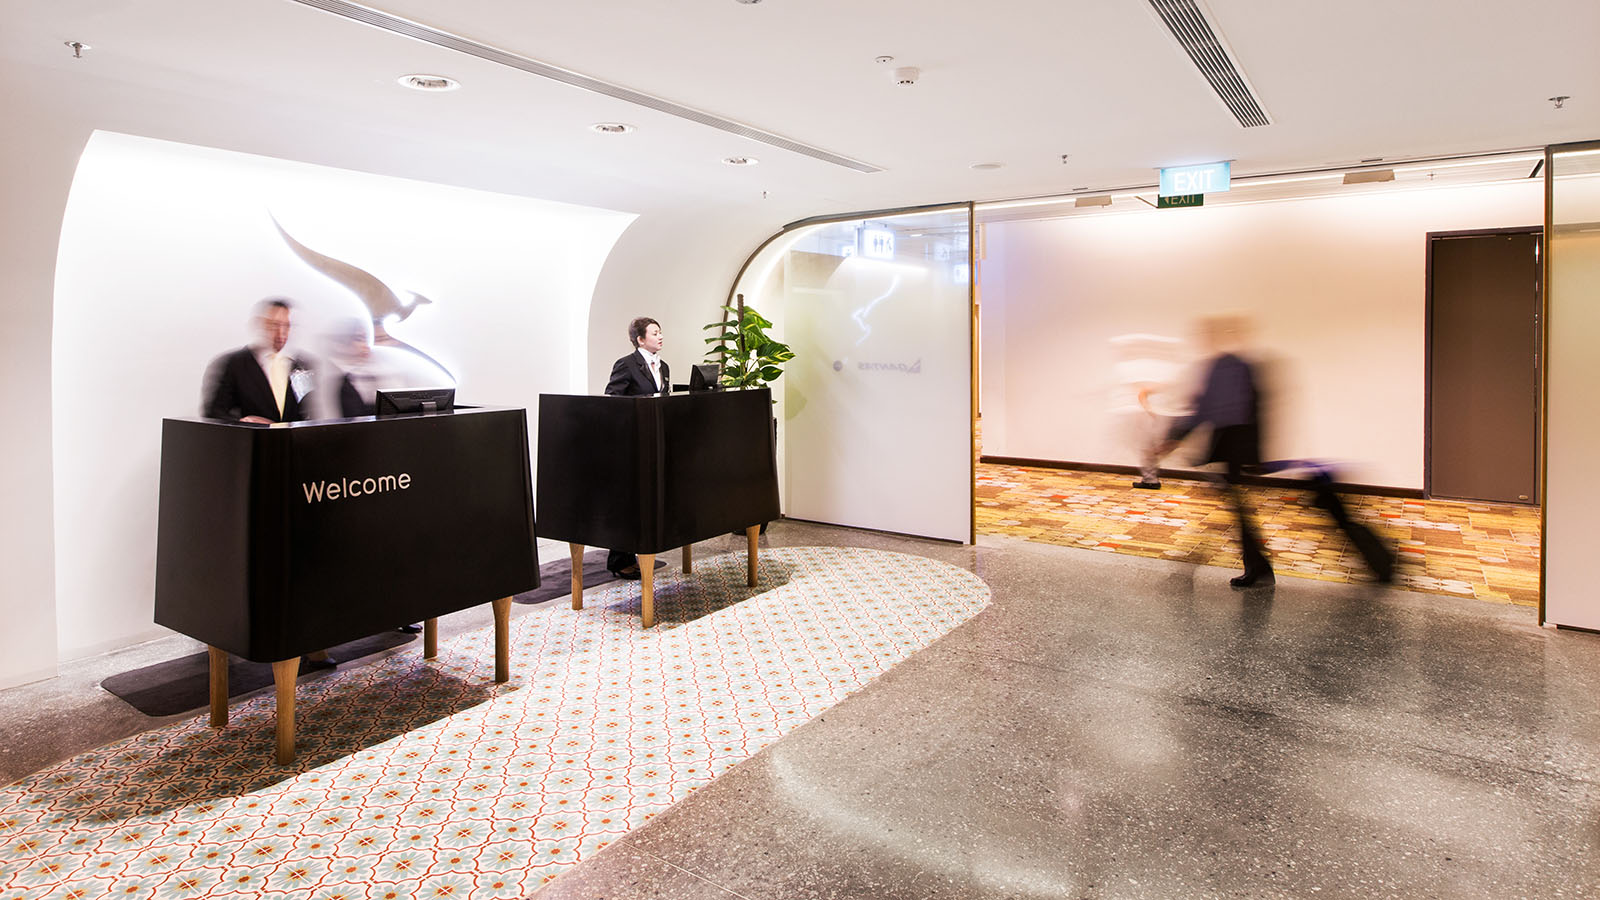 Entry to the Qantas International Business Lounge in Singapore